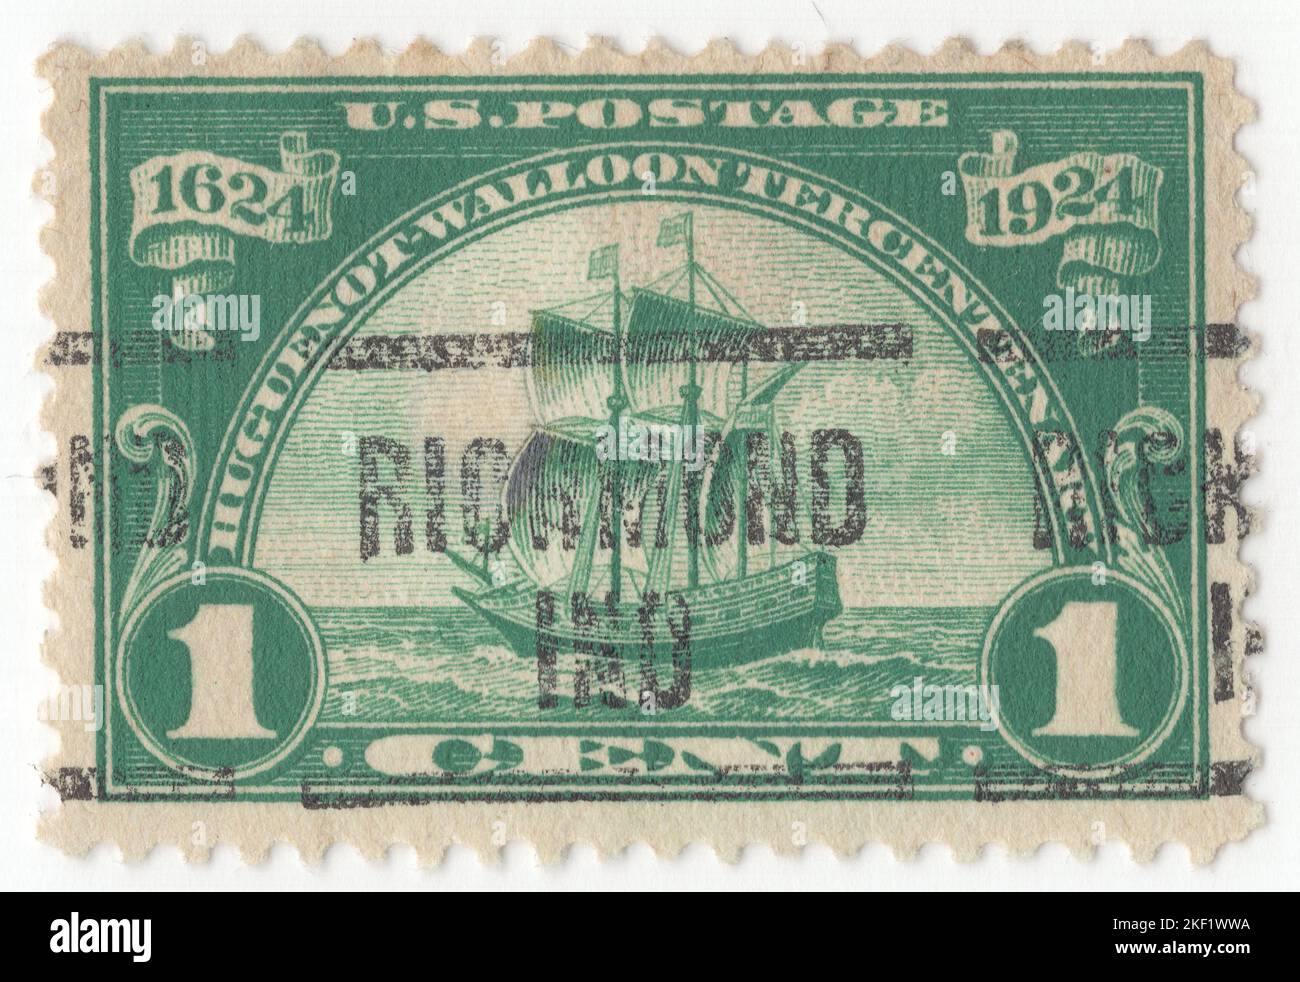 USA - 1924 May 1: An 1 cent dark green postage stamp depicting the sailing ship “New Netherland”. Huguenot-Walloon Tercentenary Issue. Settling of the Walloons and in honor of the Huguenots. It marks the 300th anniversary of the voyage of the Nieuw Nederlandt which landed in the New York area in 1624. Many of the passengers were Huguenots from France or Walloons from what is now Belgium; they became early settlers of New York State and the surrounding area Stock Photo